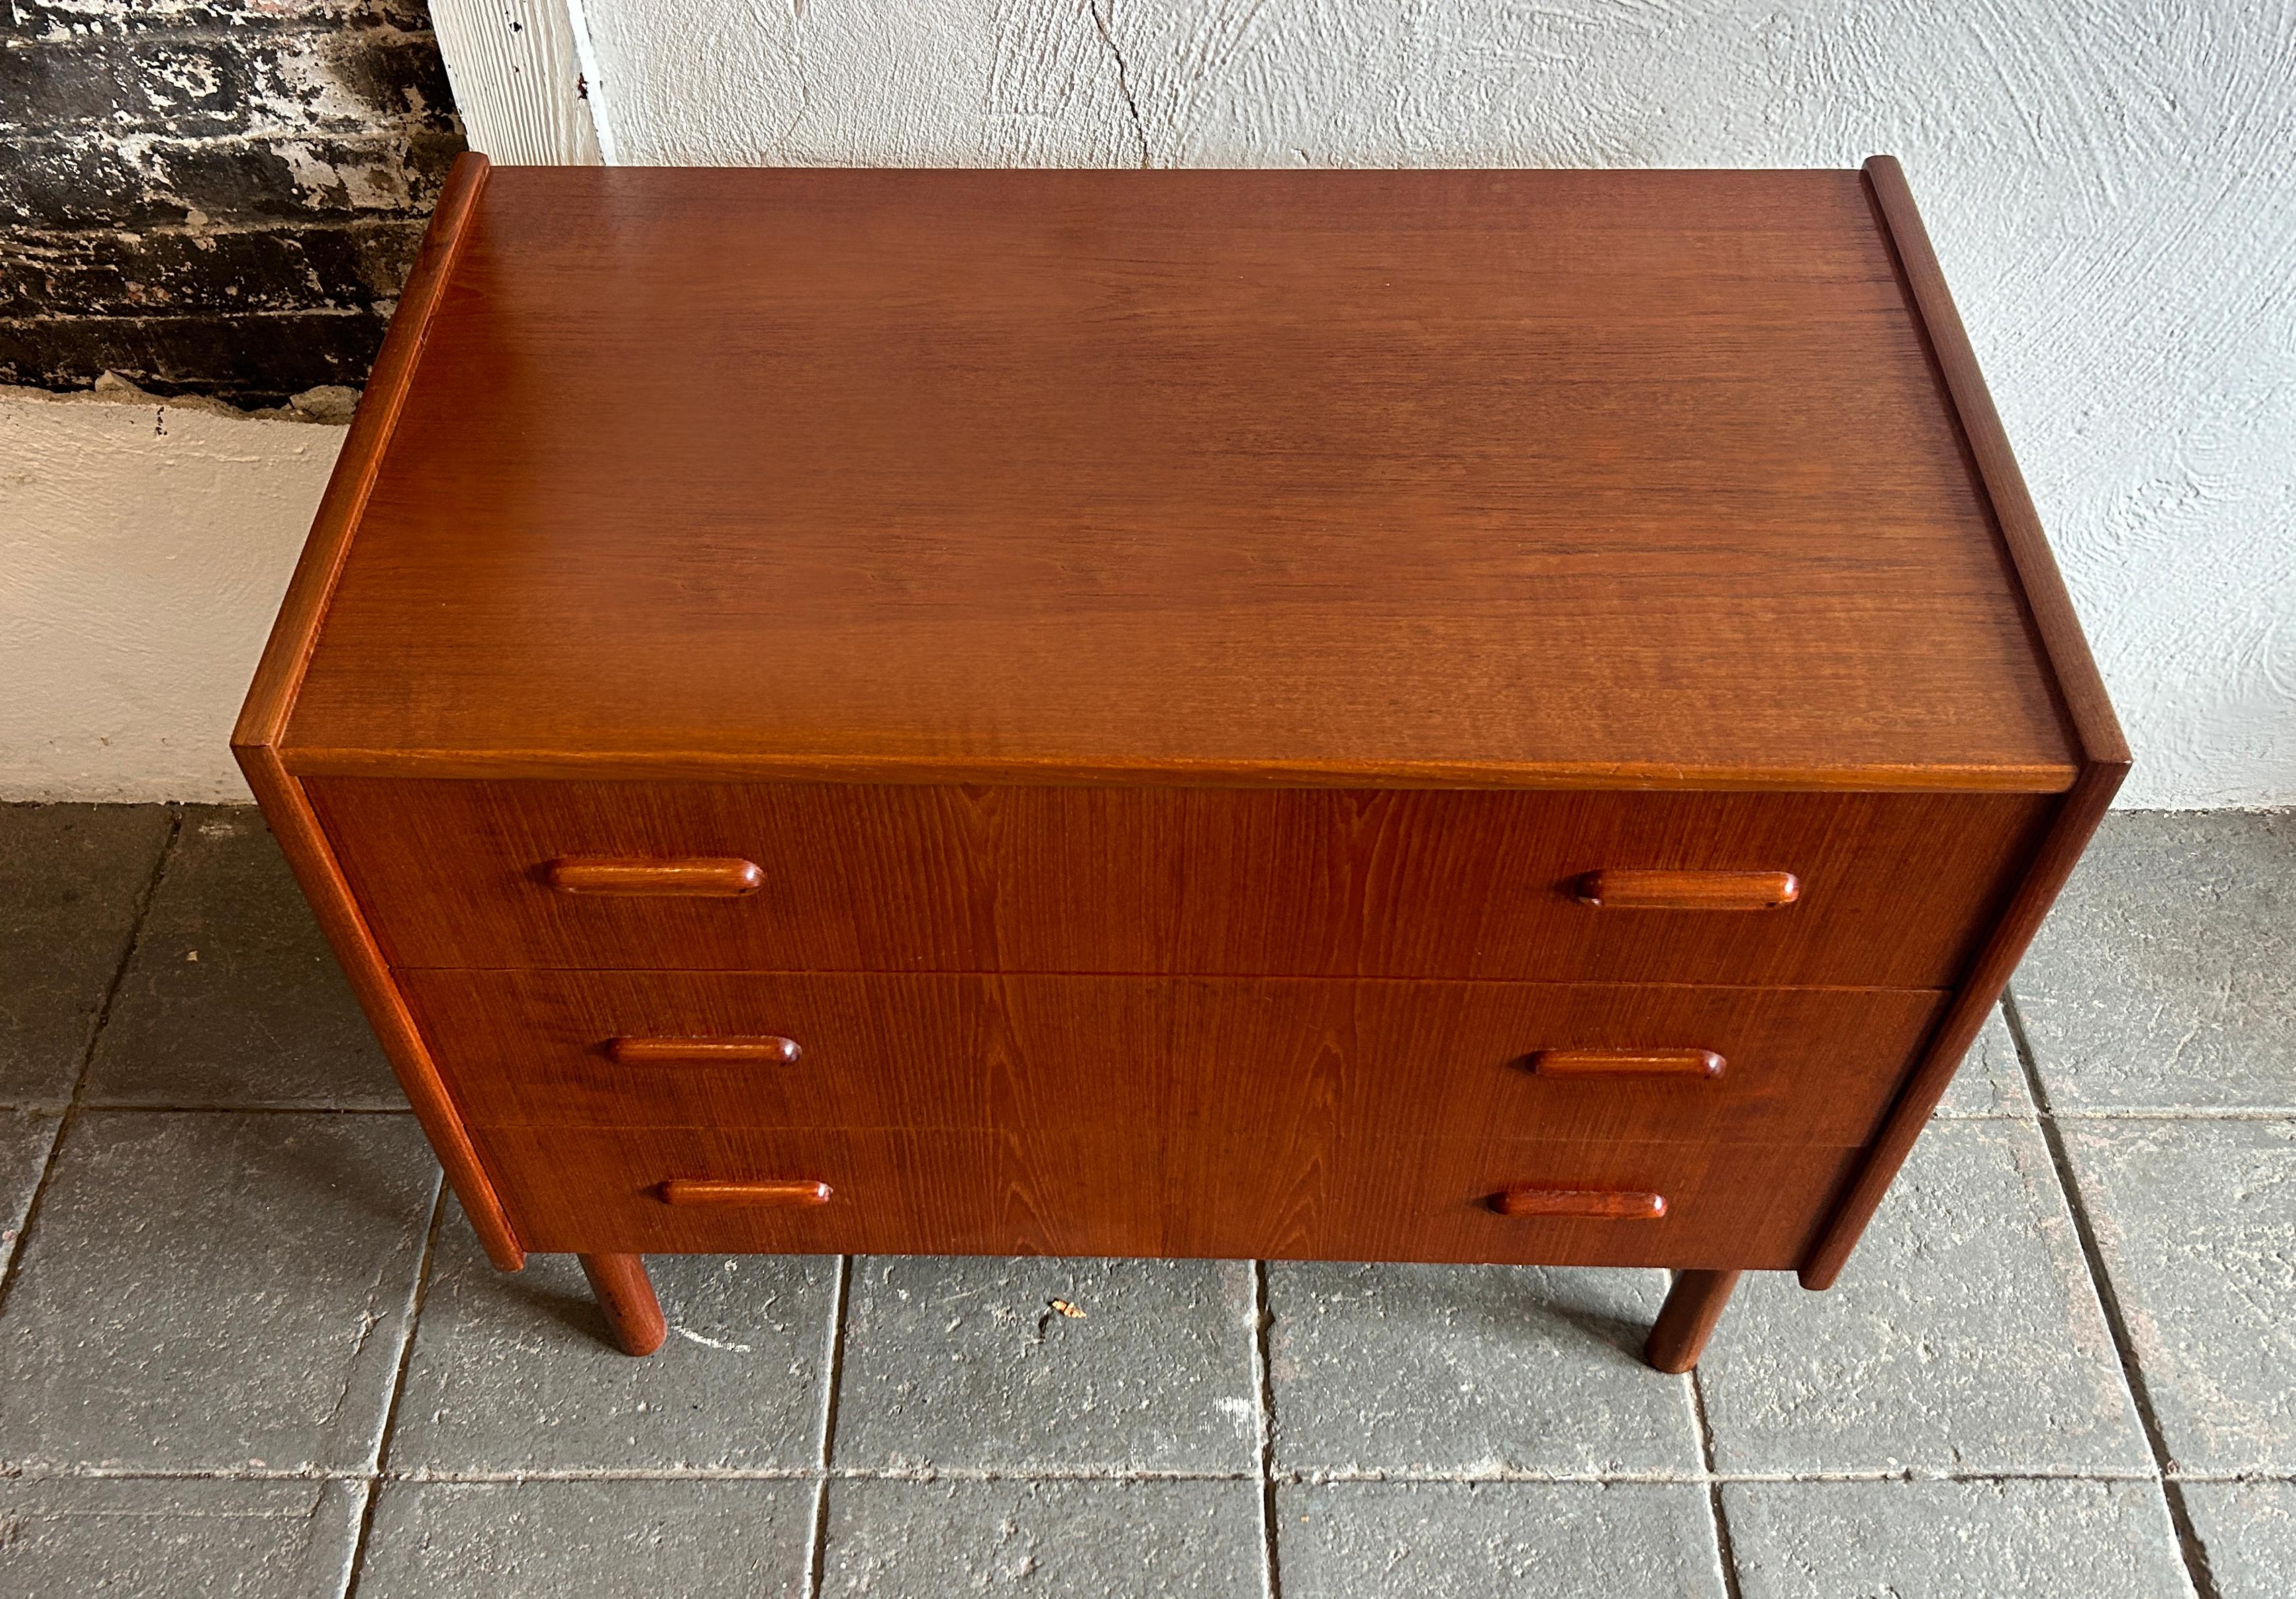 Mid Century Scandinavian Modern Small low 3 Drawer teak dresser made in Norway. Great red tone teak wood small dresser with carved handles and round cylindrical legs. Very nice construction with a beautiful wood grain. Nice simple Scandinavian